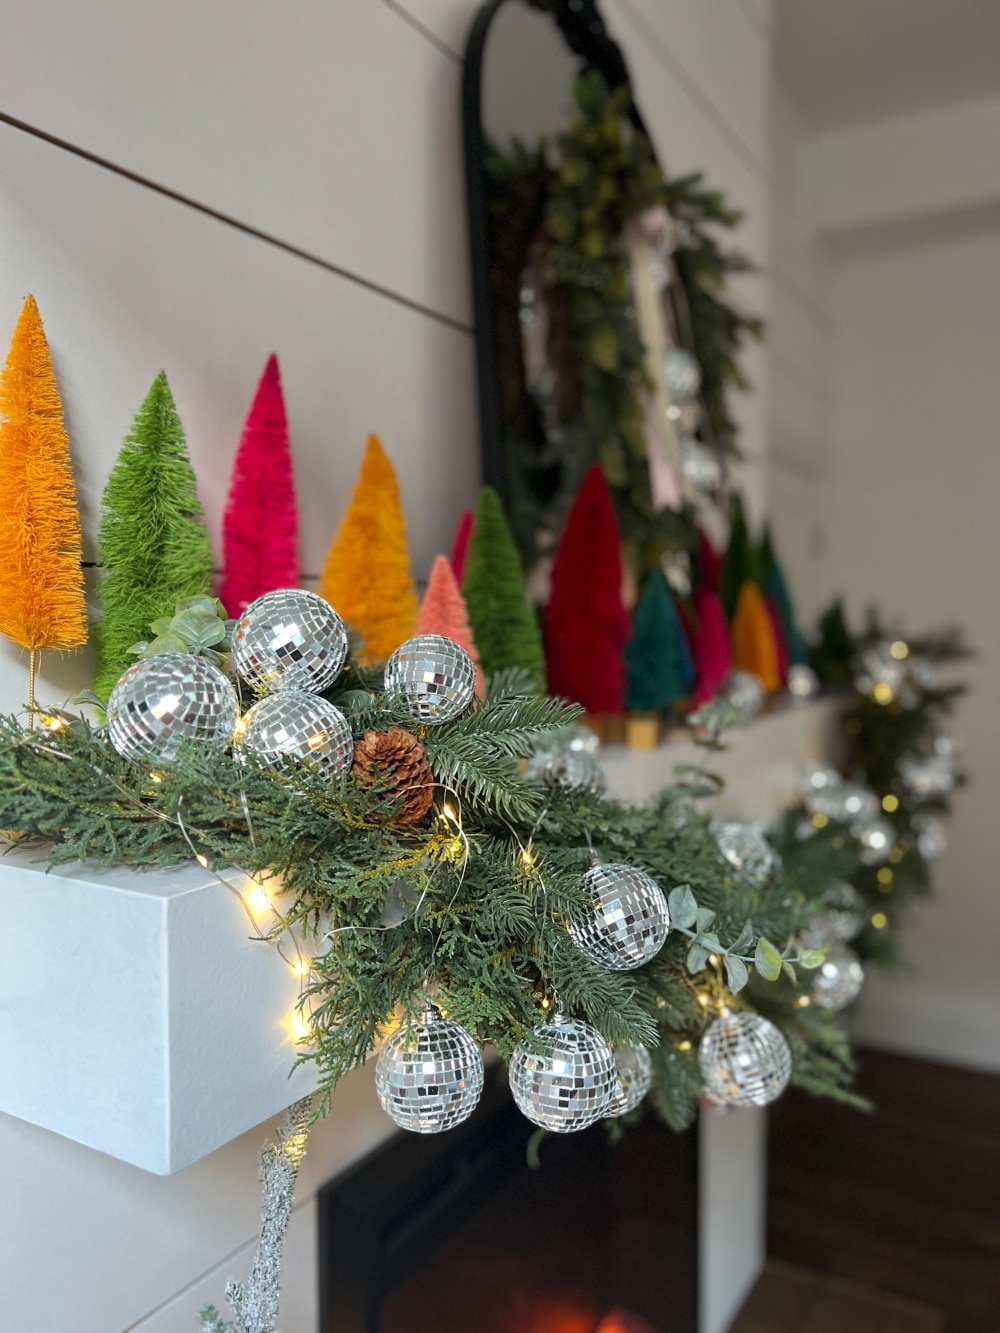 Dazzling DIY: Disco Ball-themed Christmas Mantel Tutorial. Add more sparkle to your holiday with this dazzling sparkly mantel!